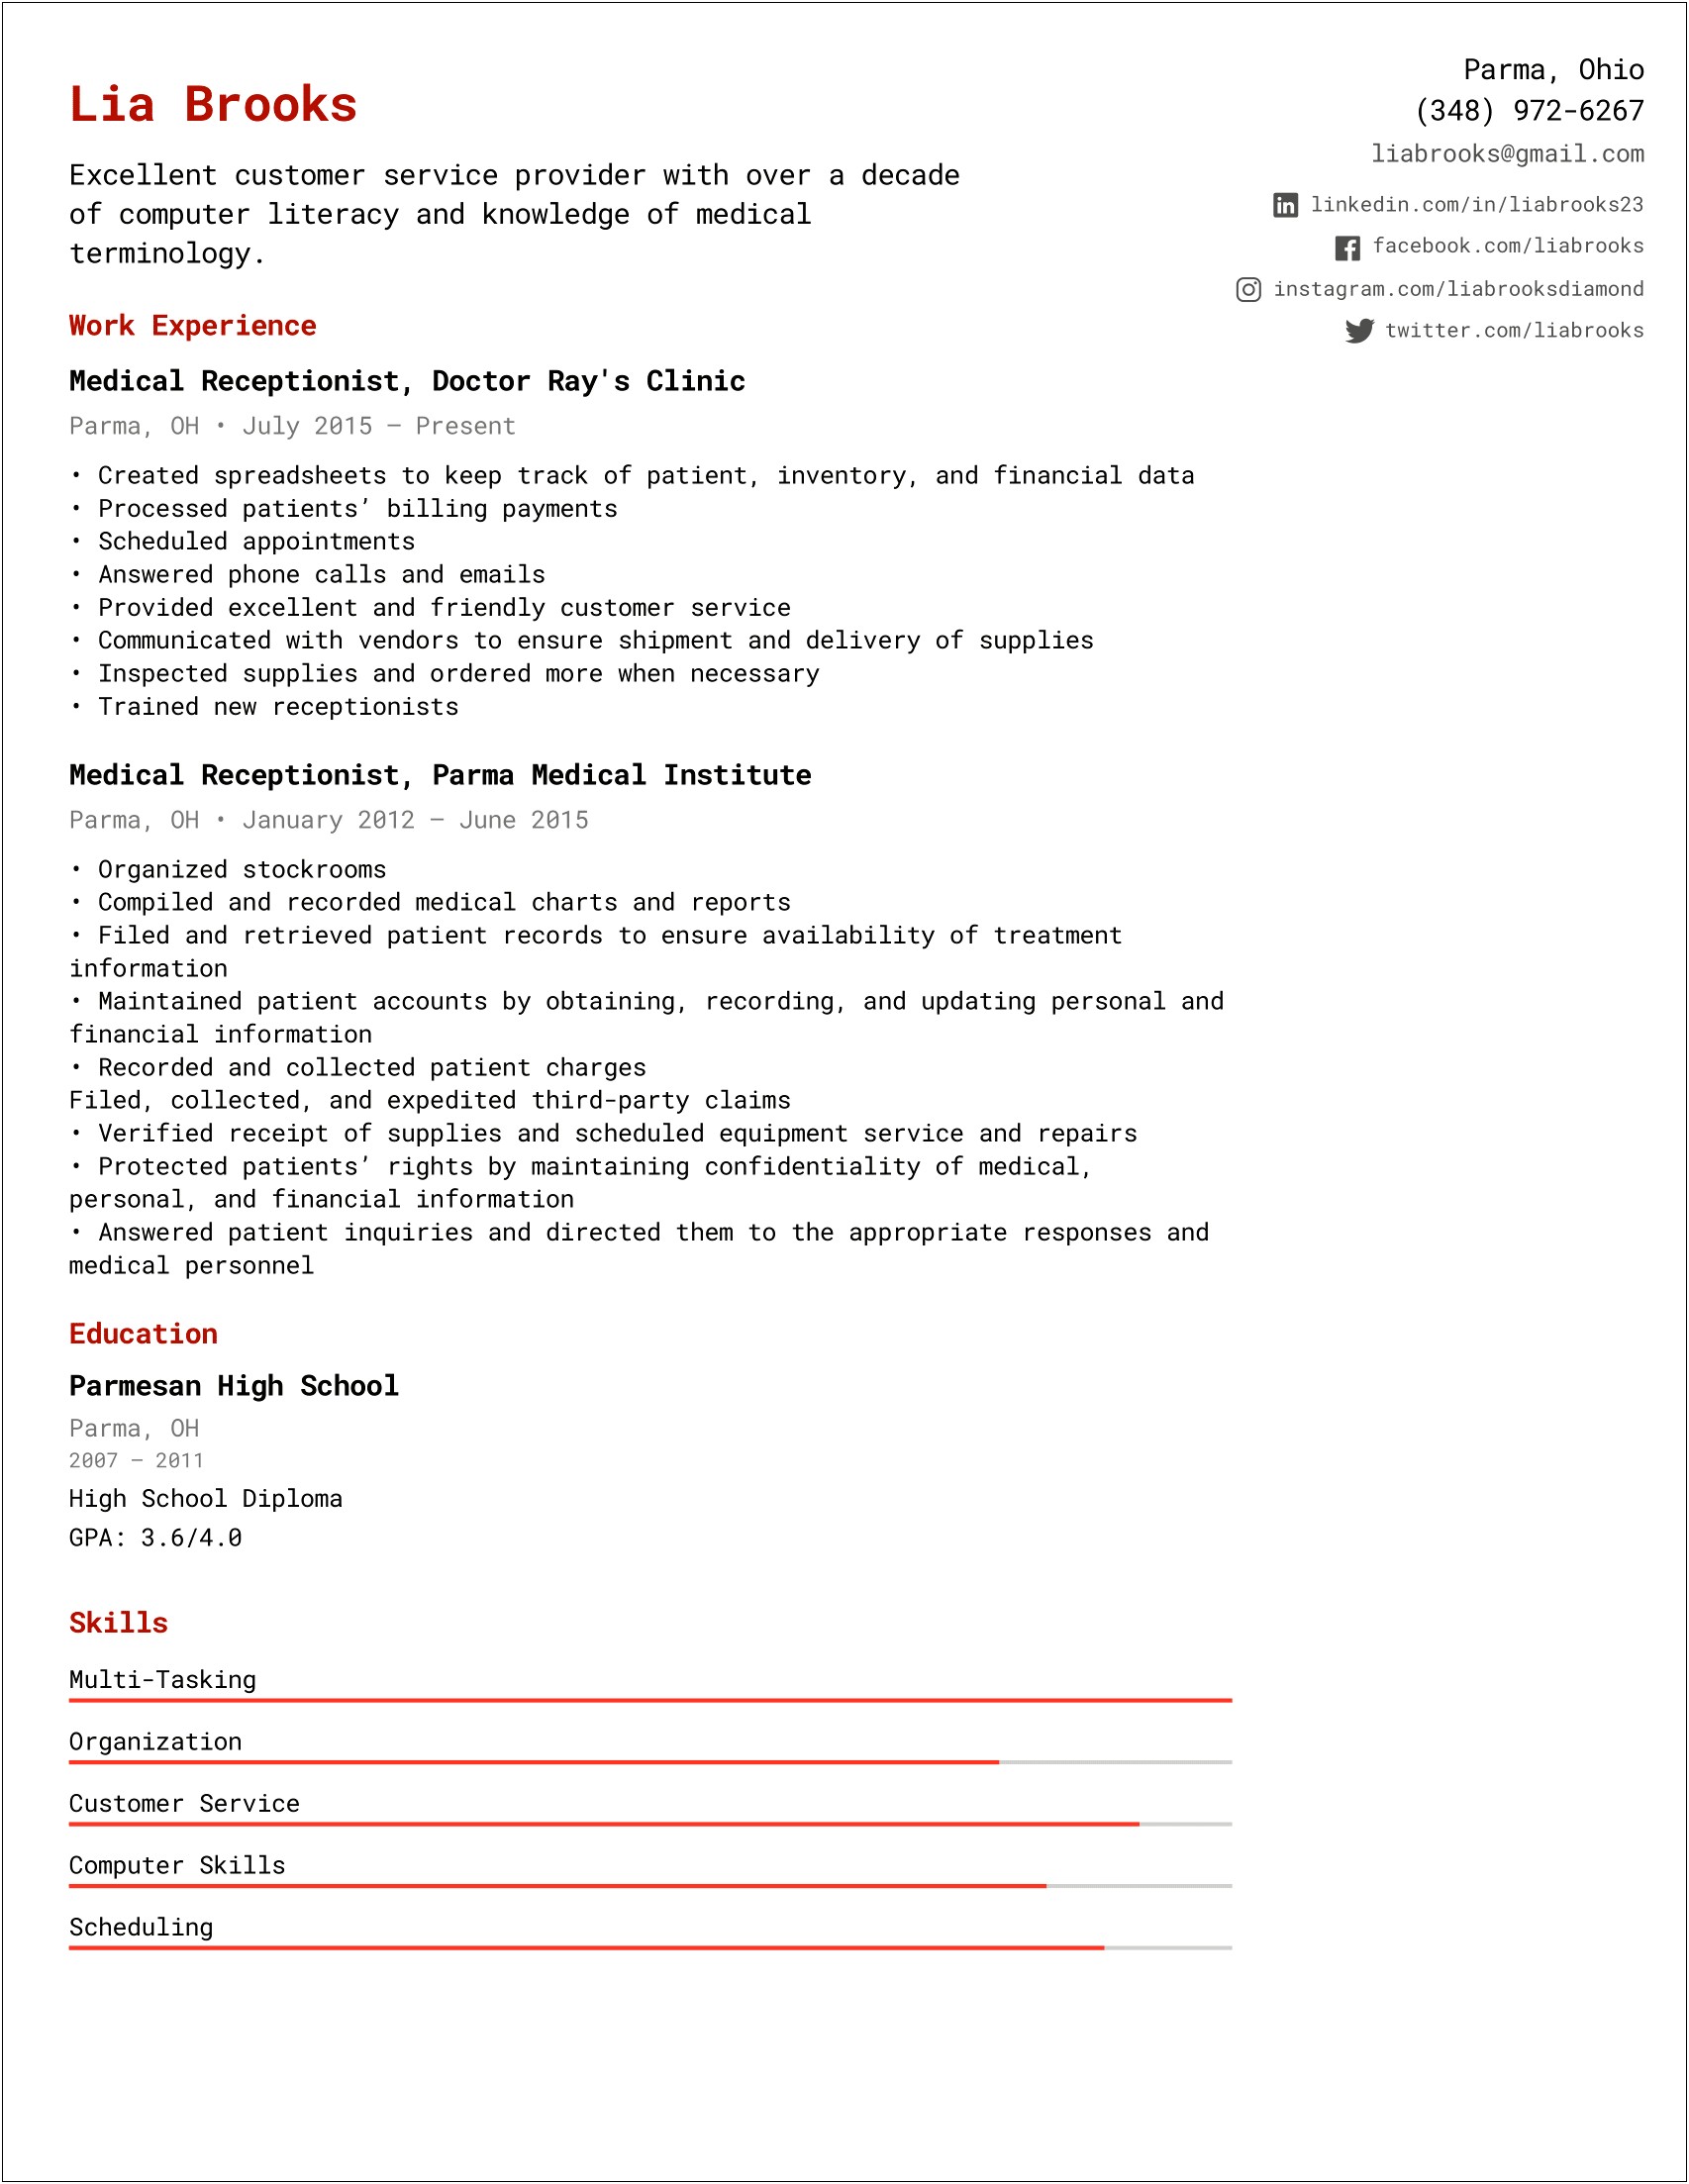 Sample Resume Law Firm Receptionist